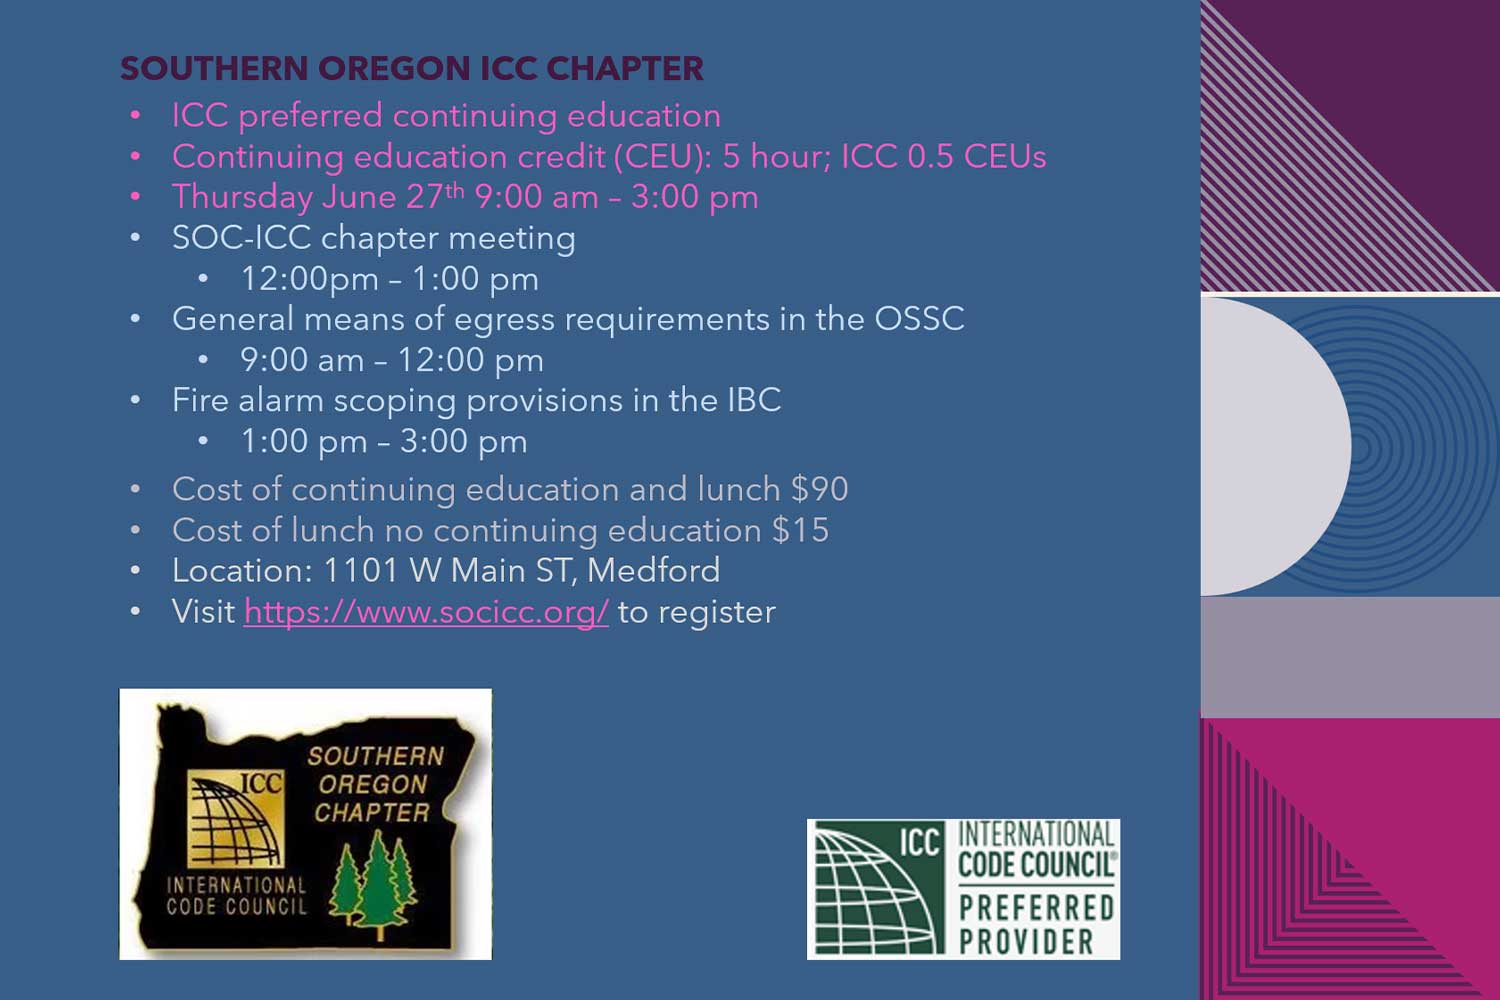 Join ICC for our Preferred Continuing Education on June 27